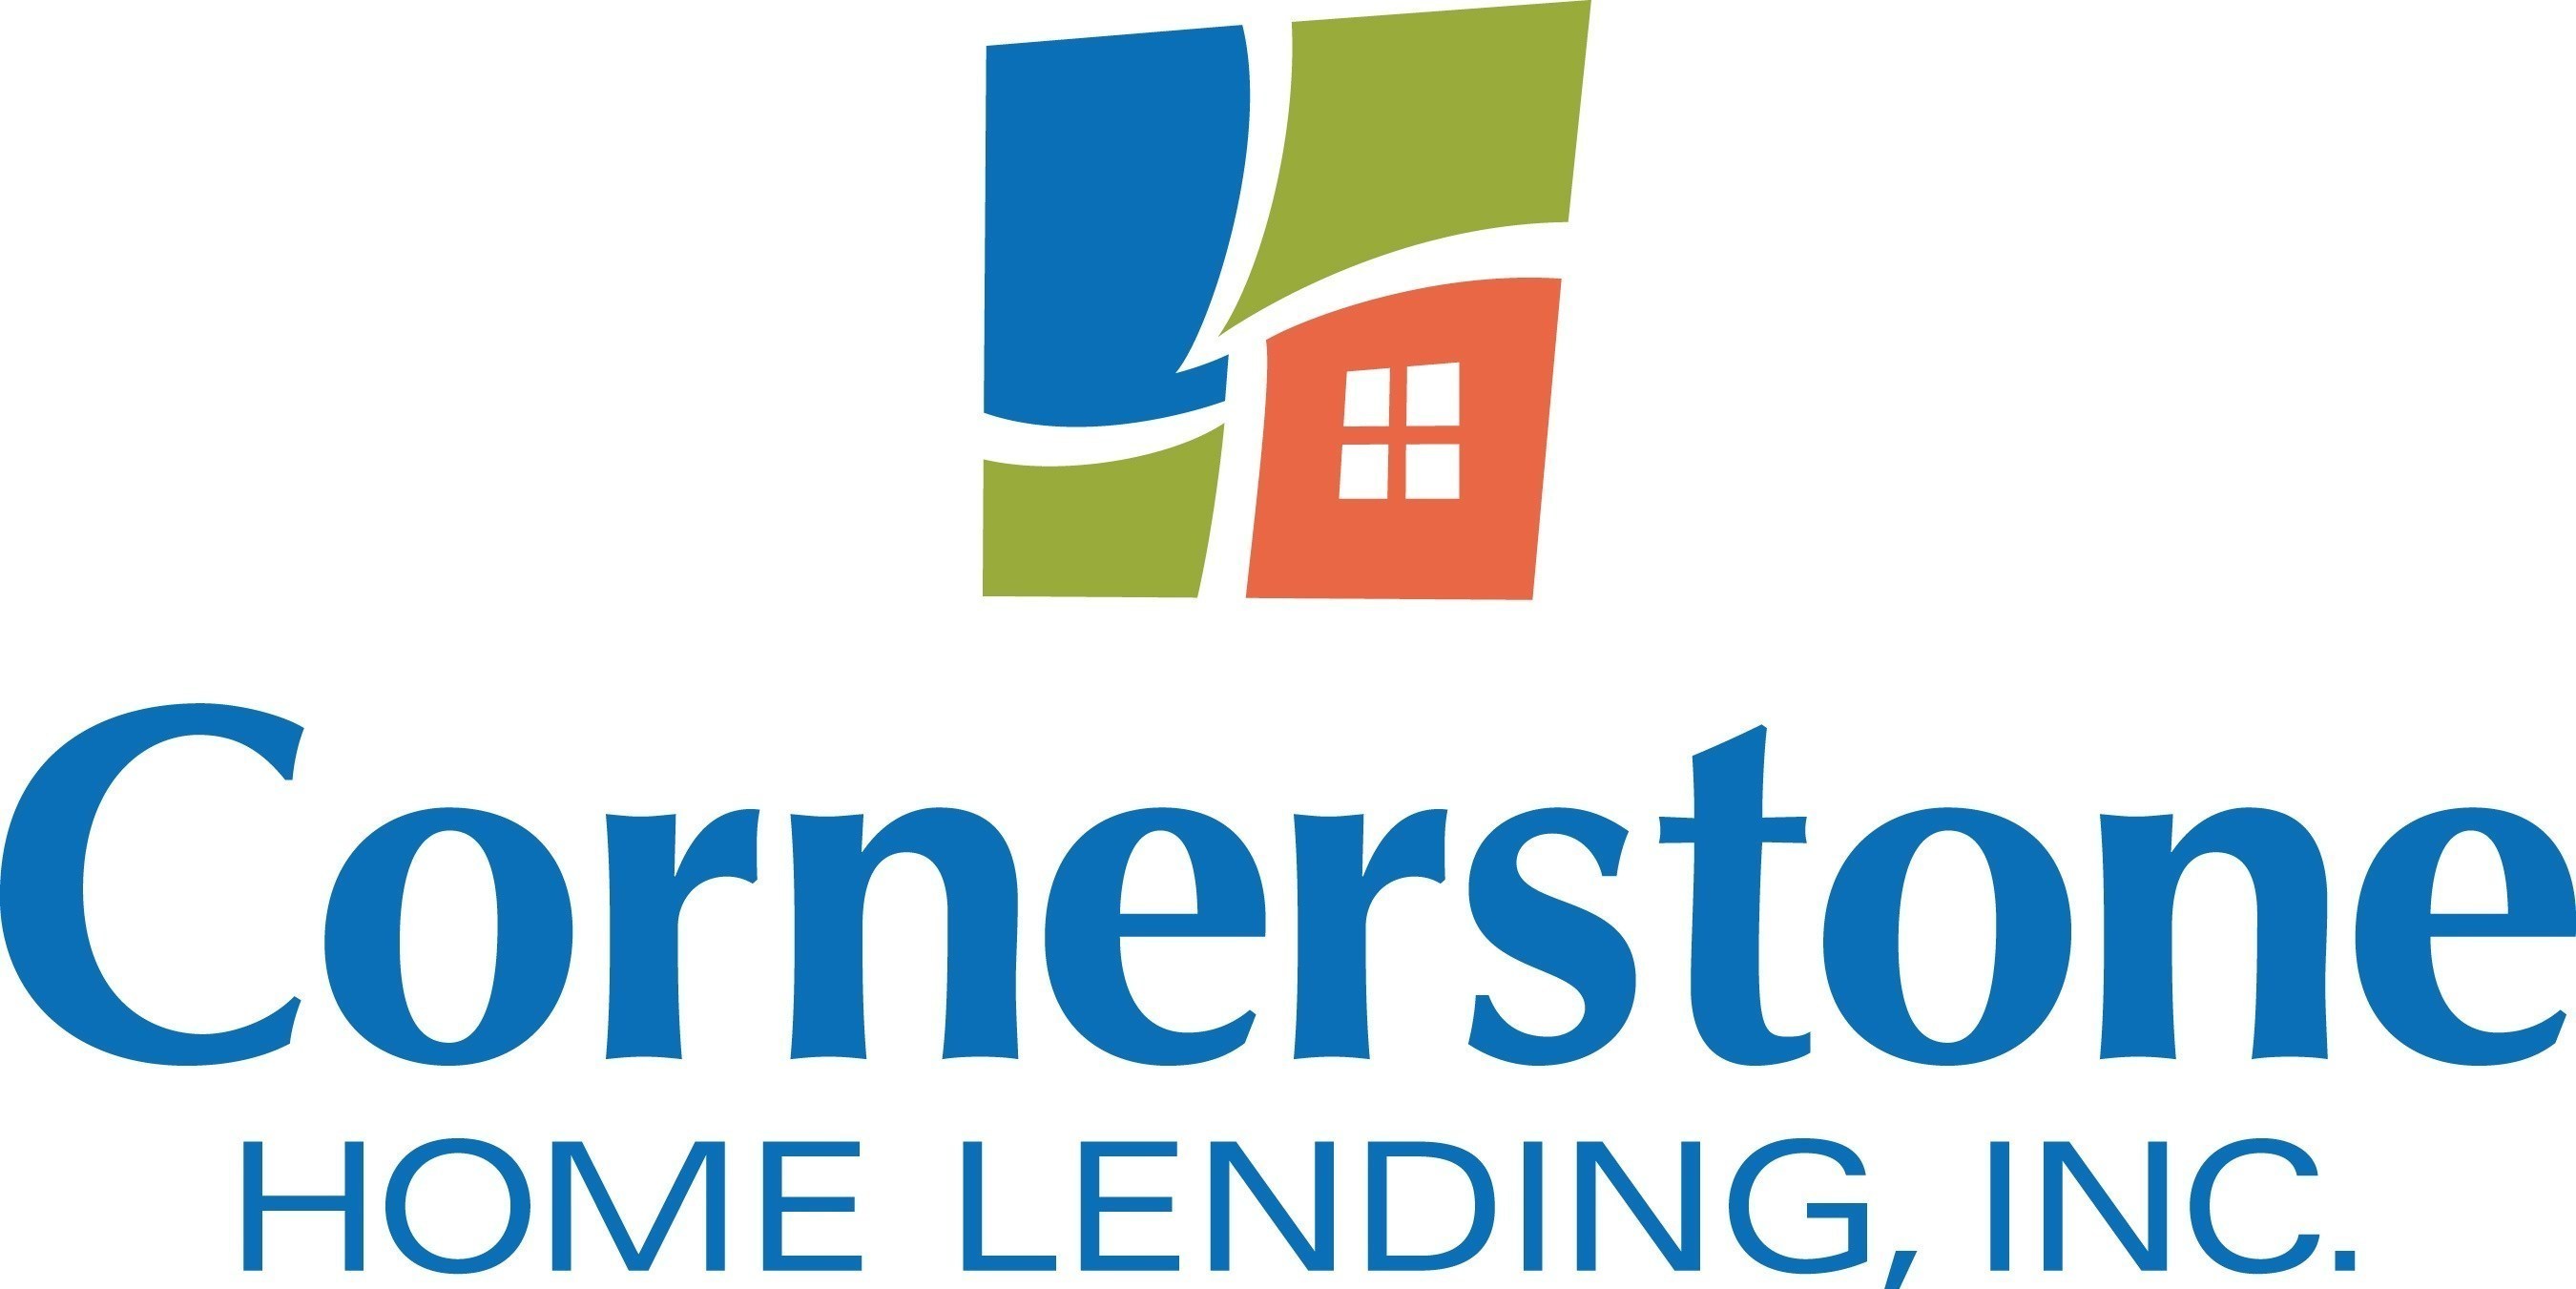 Cornerstone Home Lending, Inc. founded in 1988 in Houston, Texas